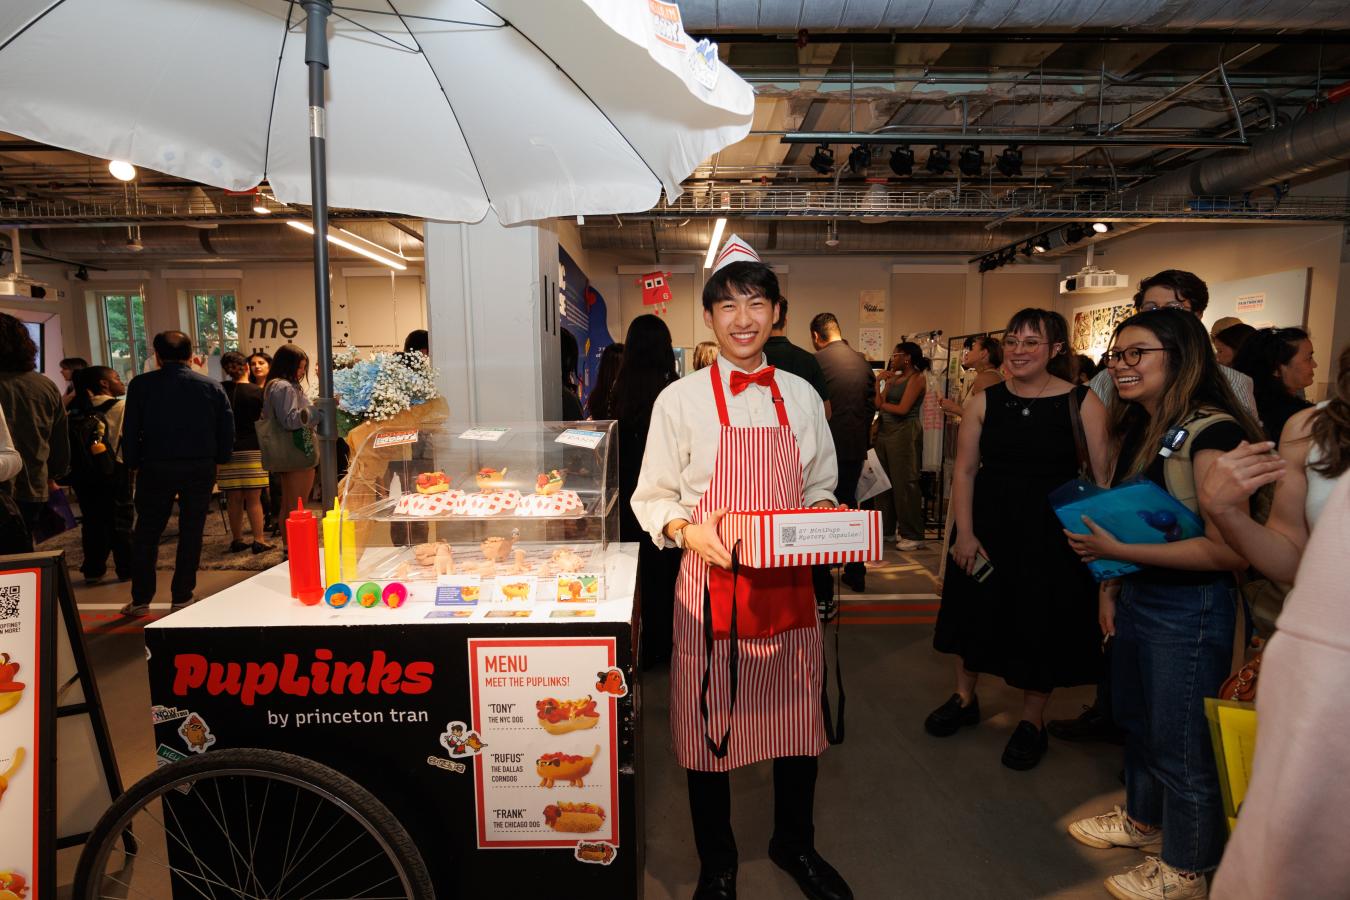 Student standing with their final project - a creative hotdog stand